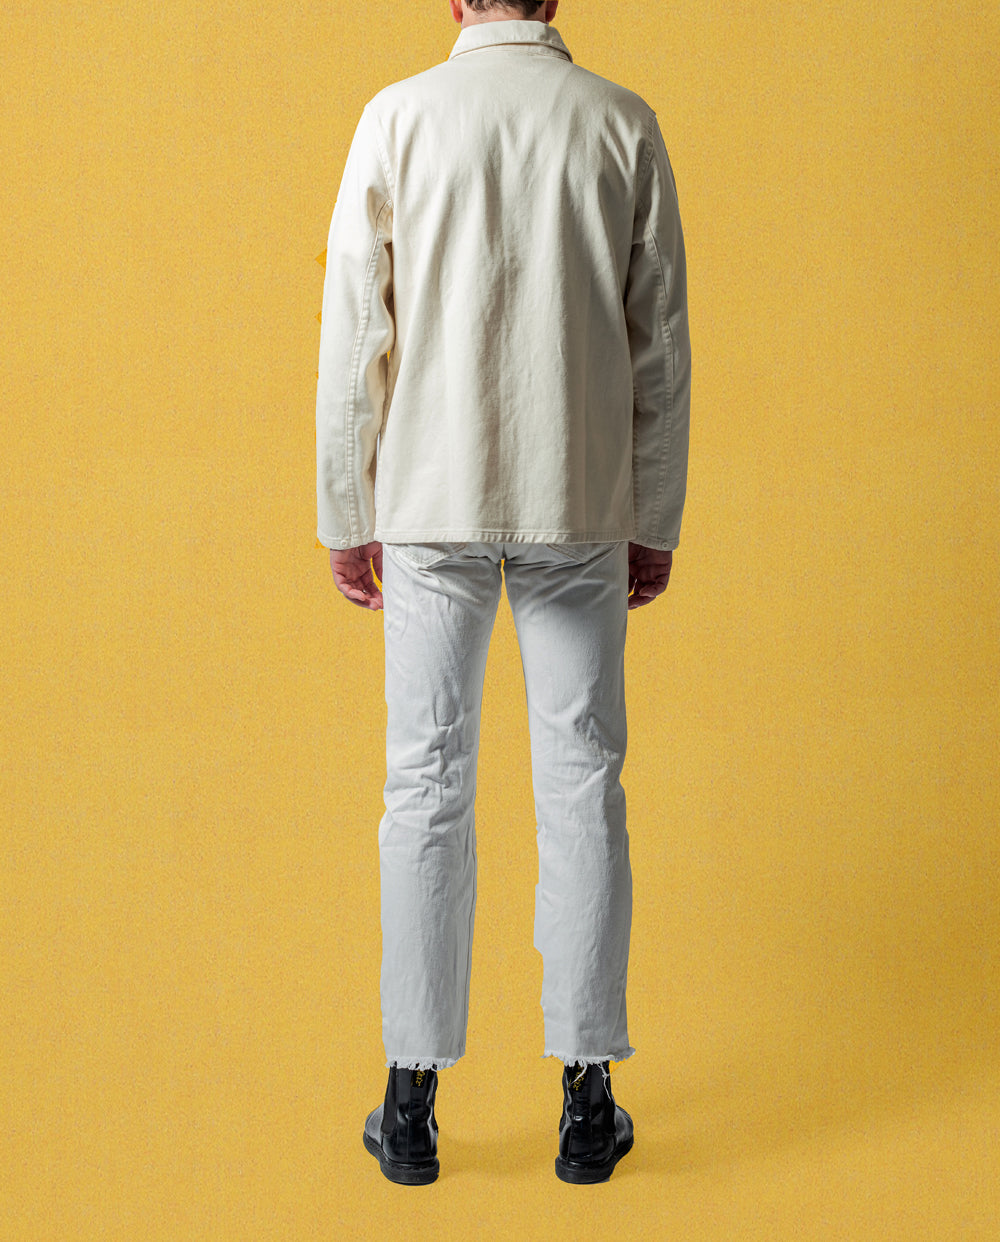 BIG SUN WORKERS JACKET - OFF WHITE